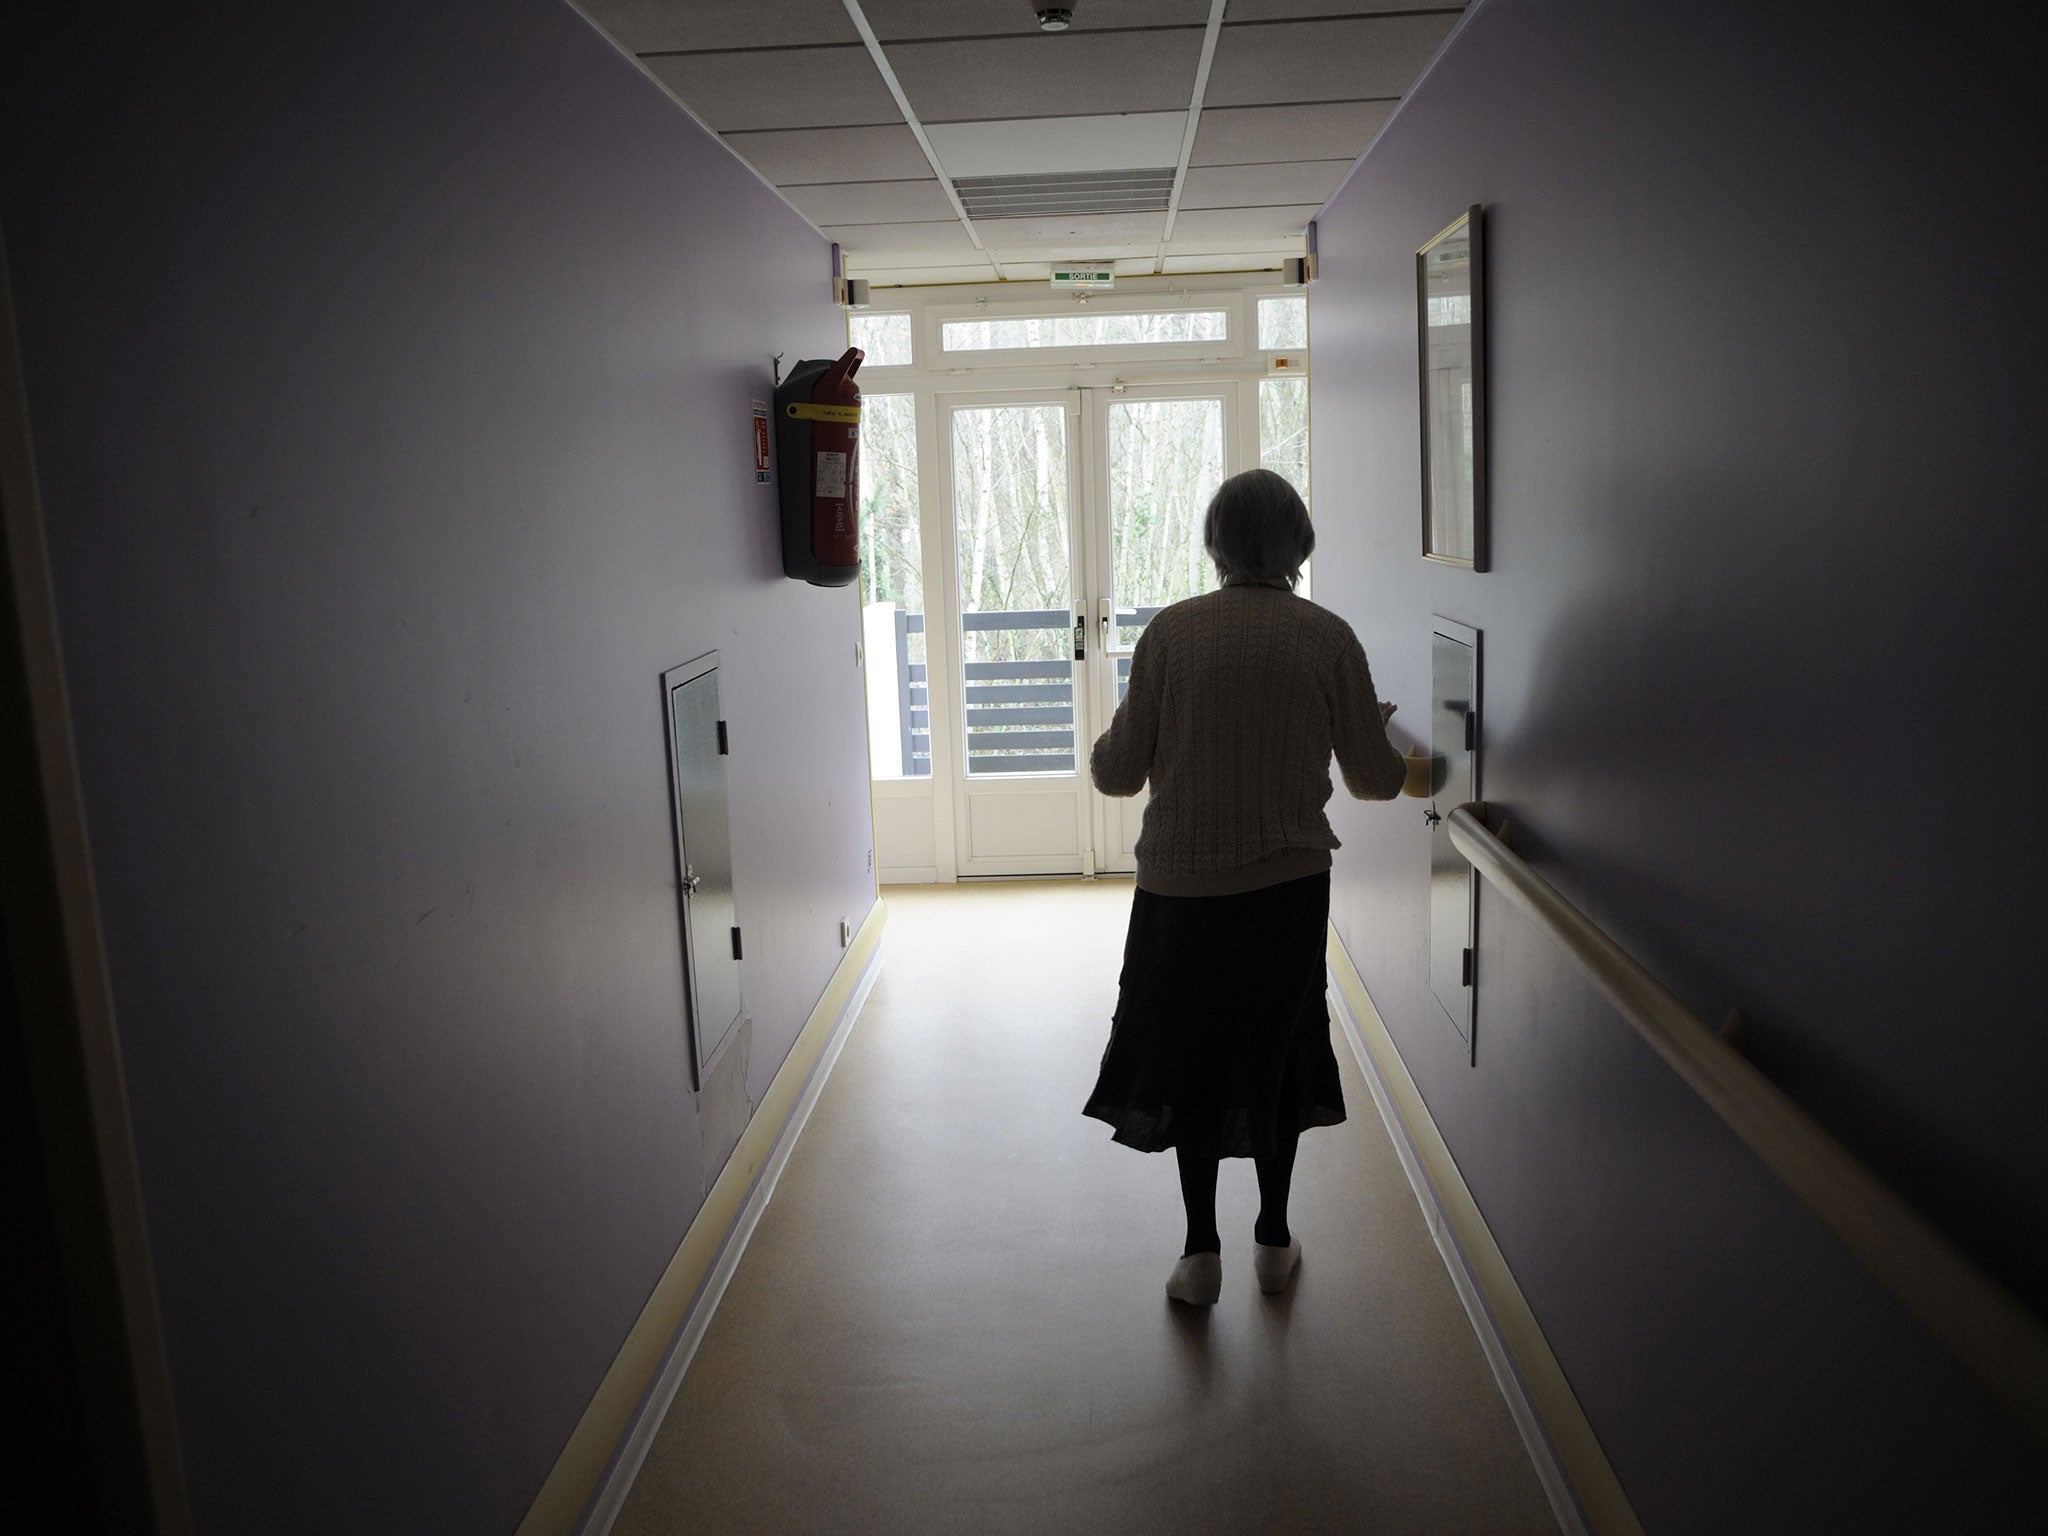 Research forecasts that over one million Britons will suffer from dementia by 2025